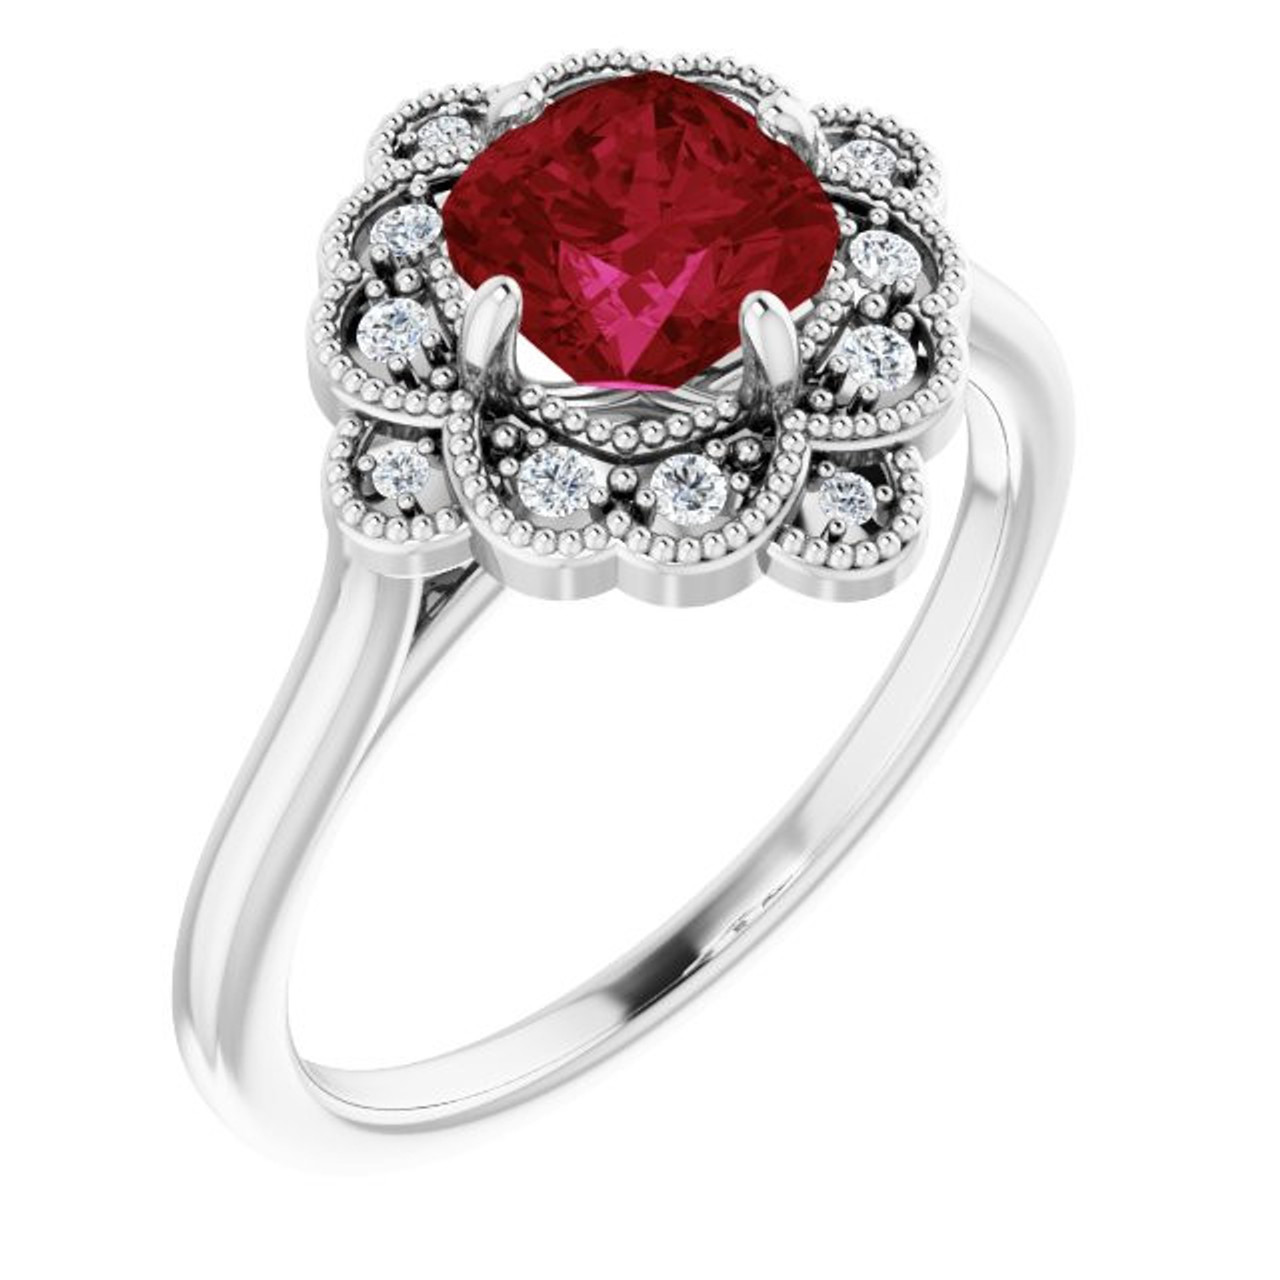 1.00 Carat Low Price on 7x5mm Ruby Gemstone in Bold Chunky Ring for SALE